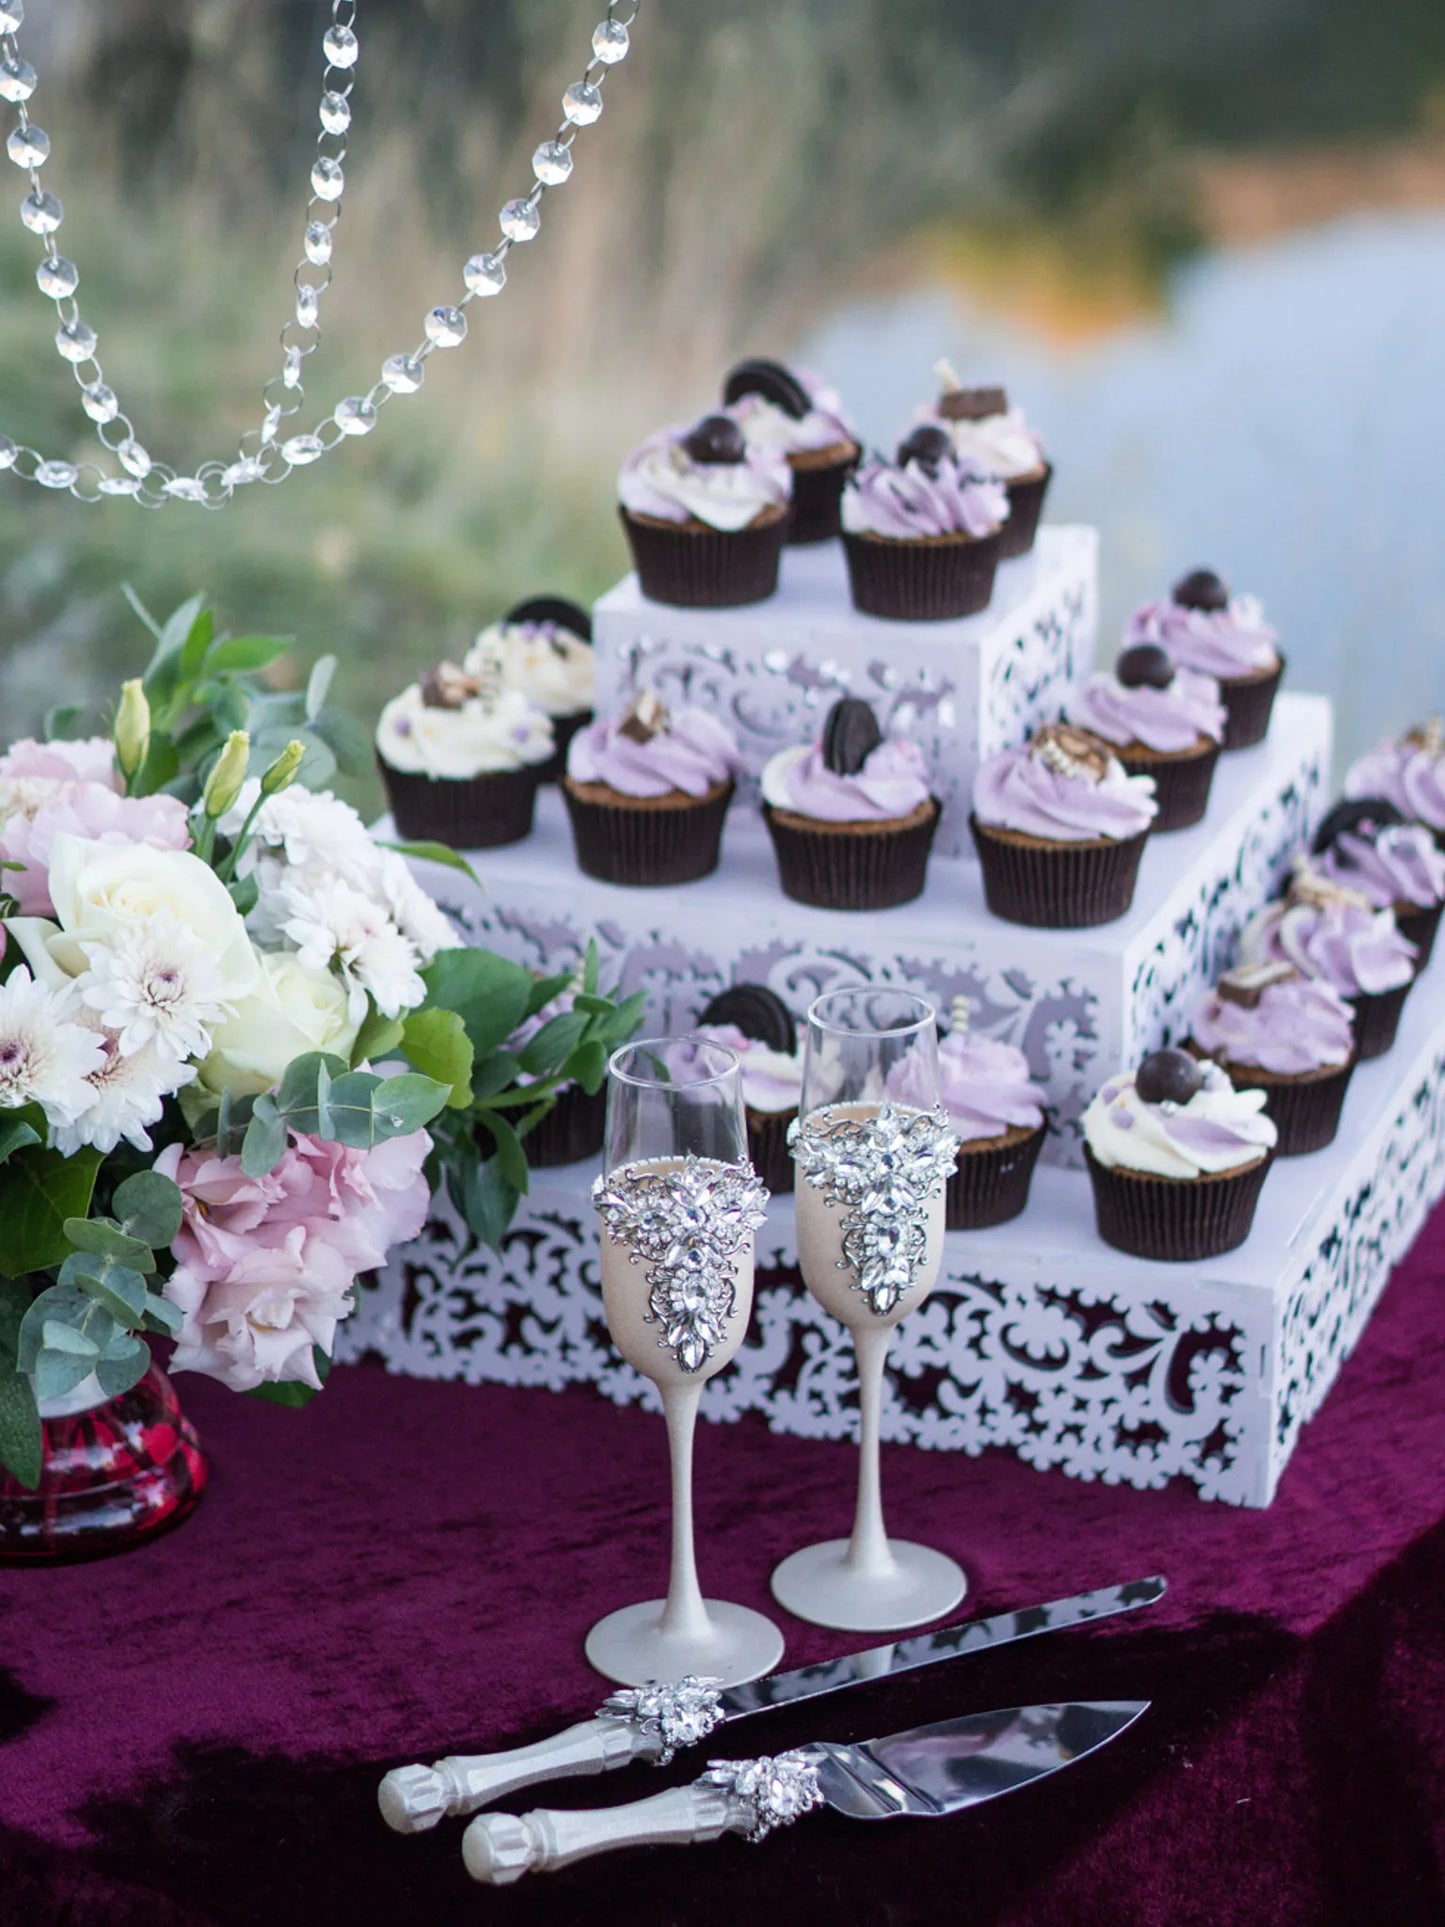 Unique Silver and Ivory Crystals Mr. and Mrs. Toast Glasses and Cake Set